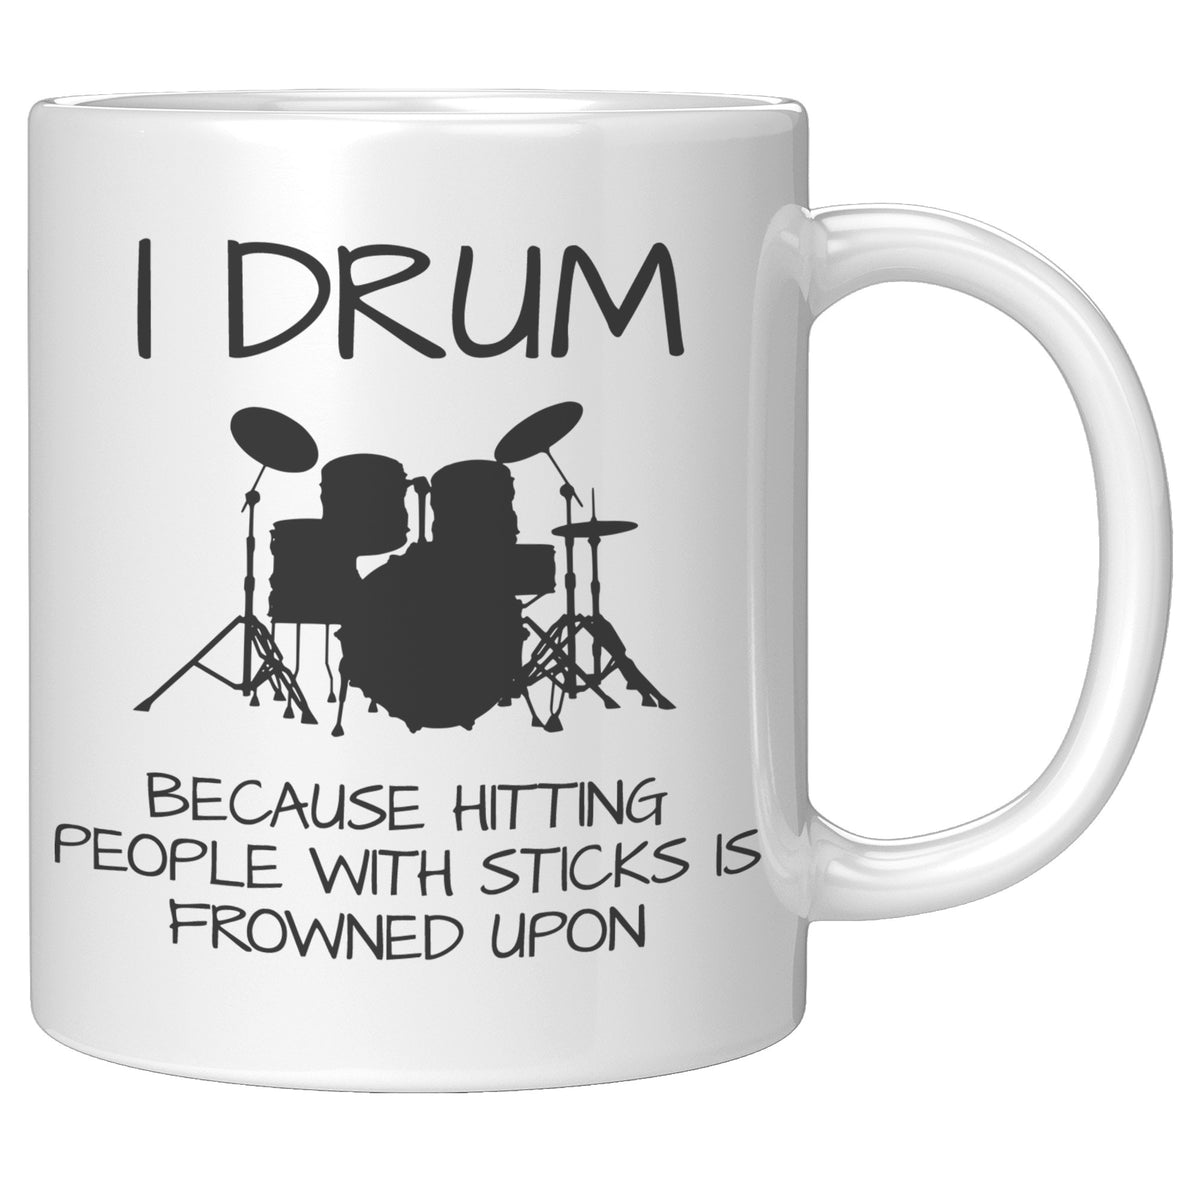 Funny Drummer Mug - Hitting People with Sticks is Frowned Upon